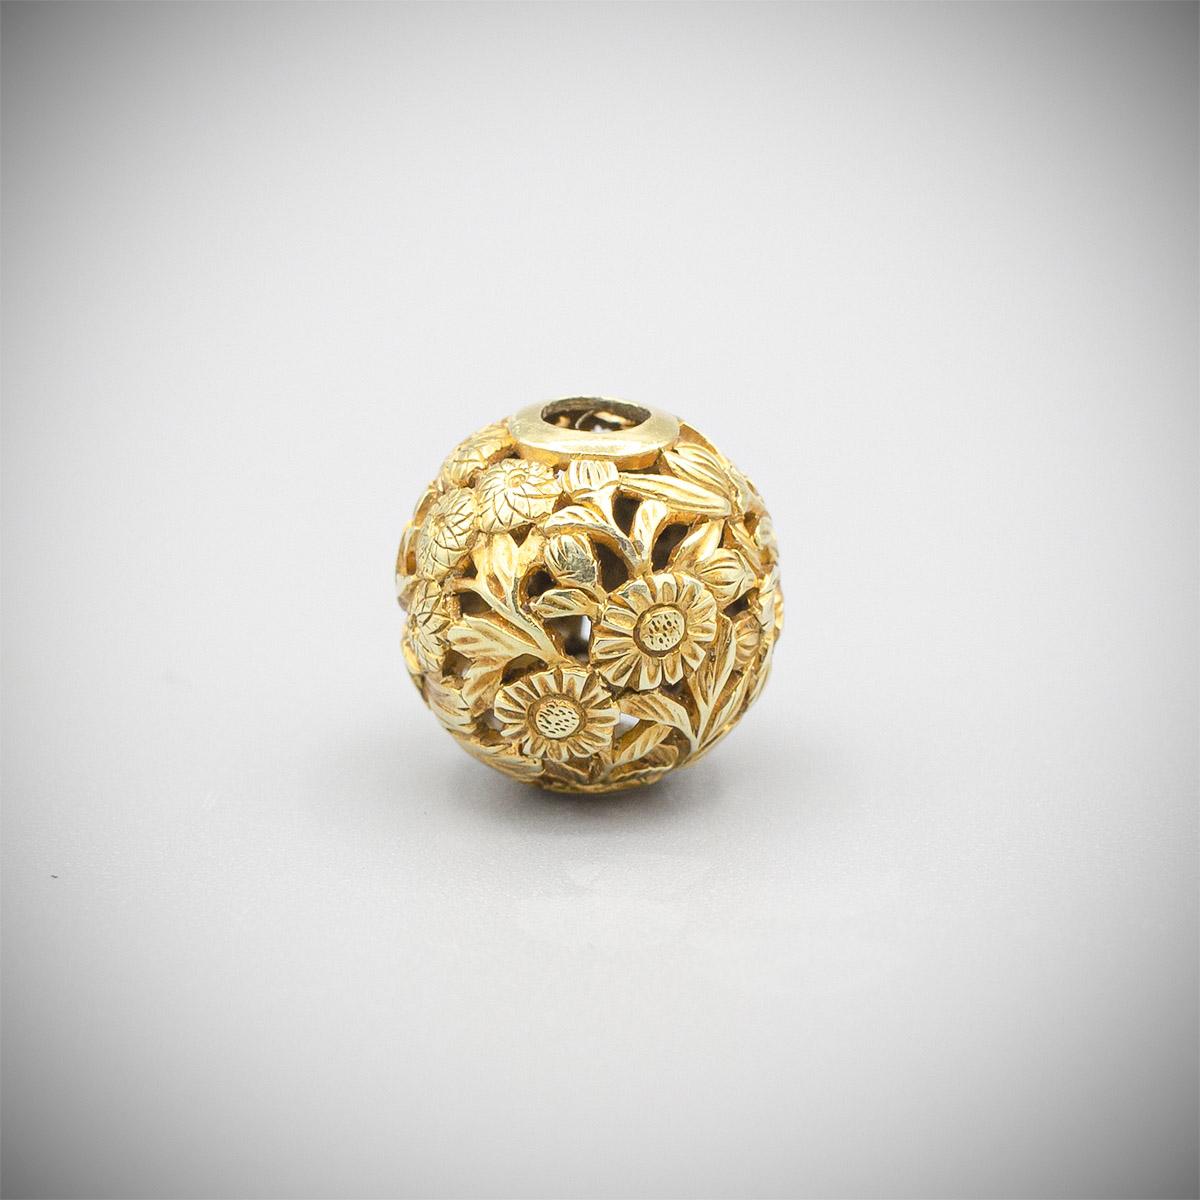 Carved Gold Ojime with Chrysanthemums